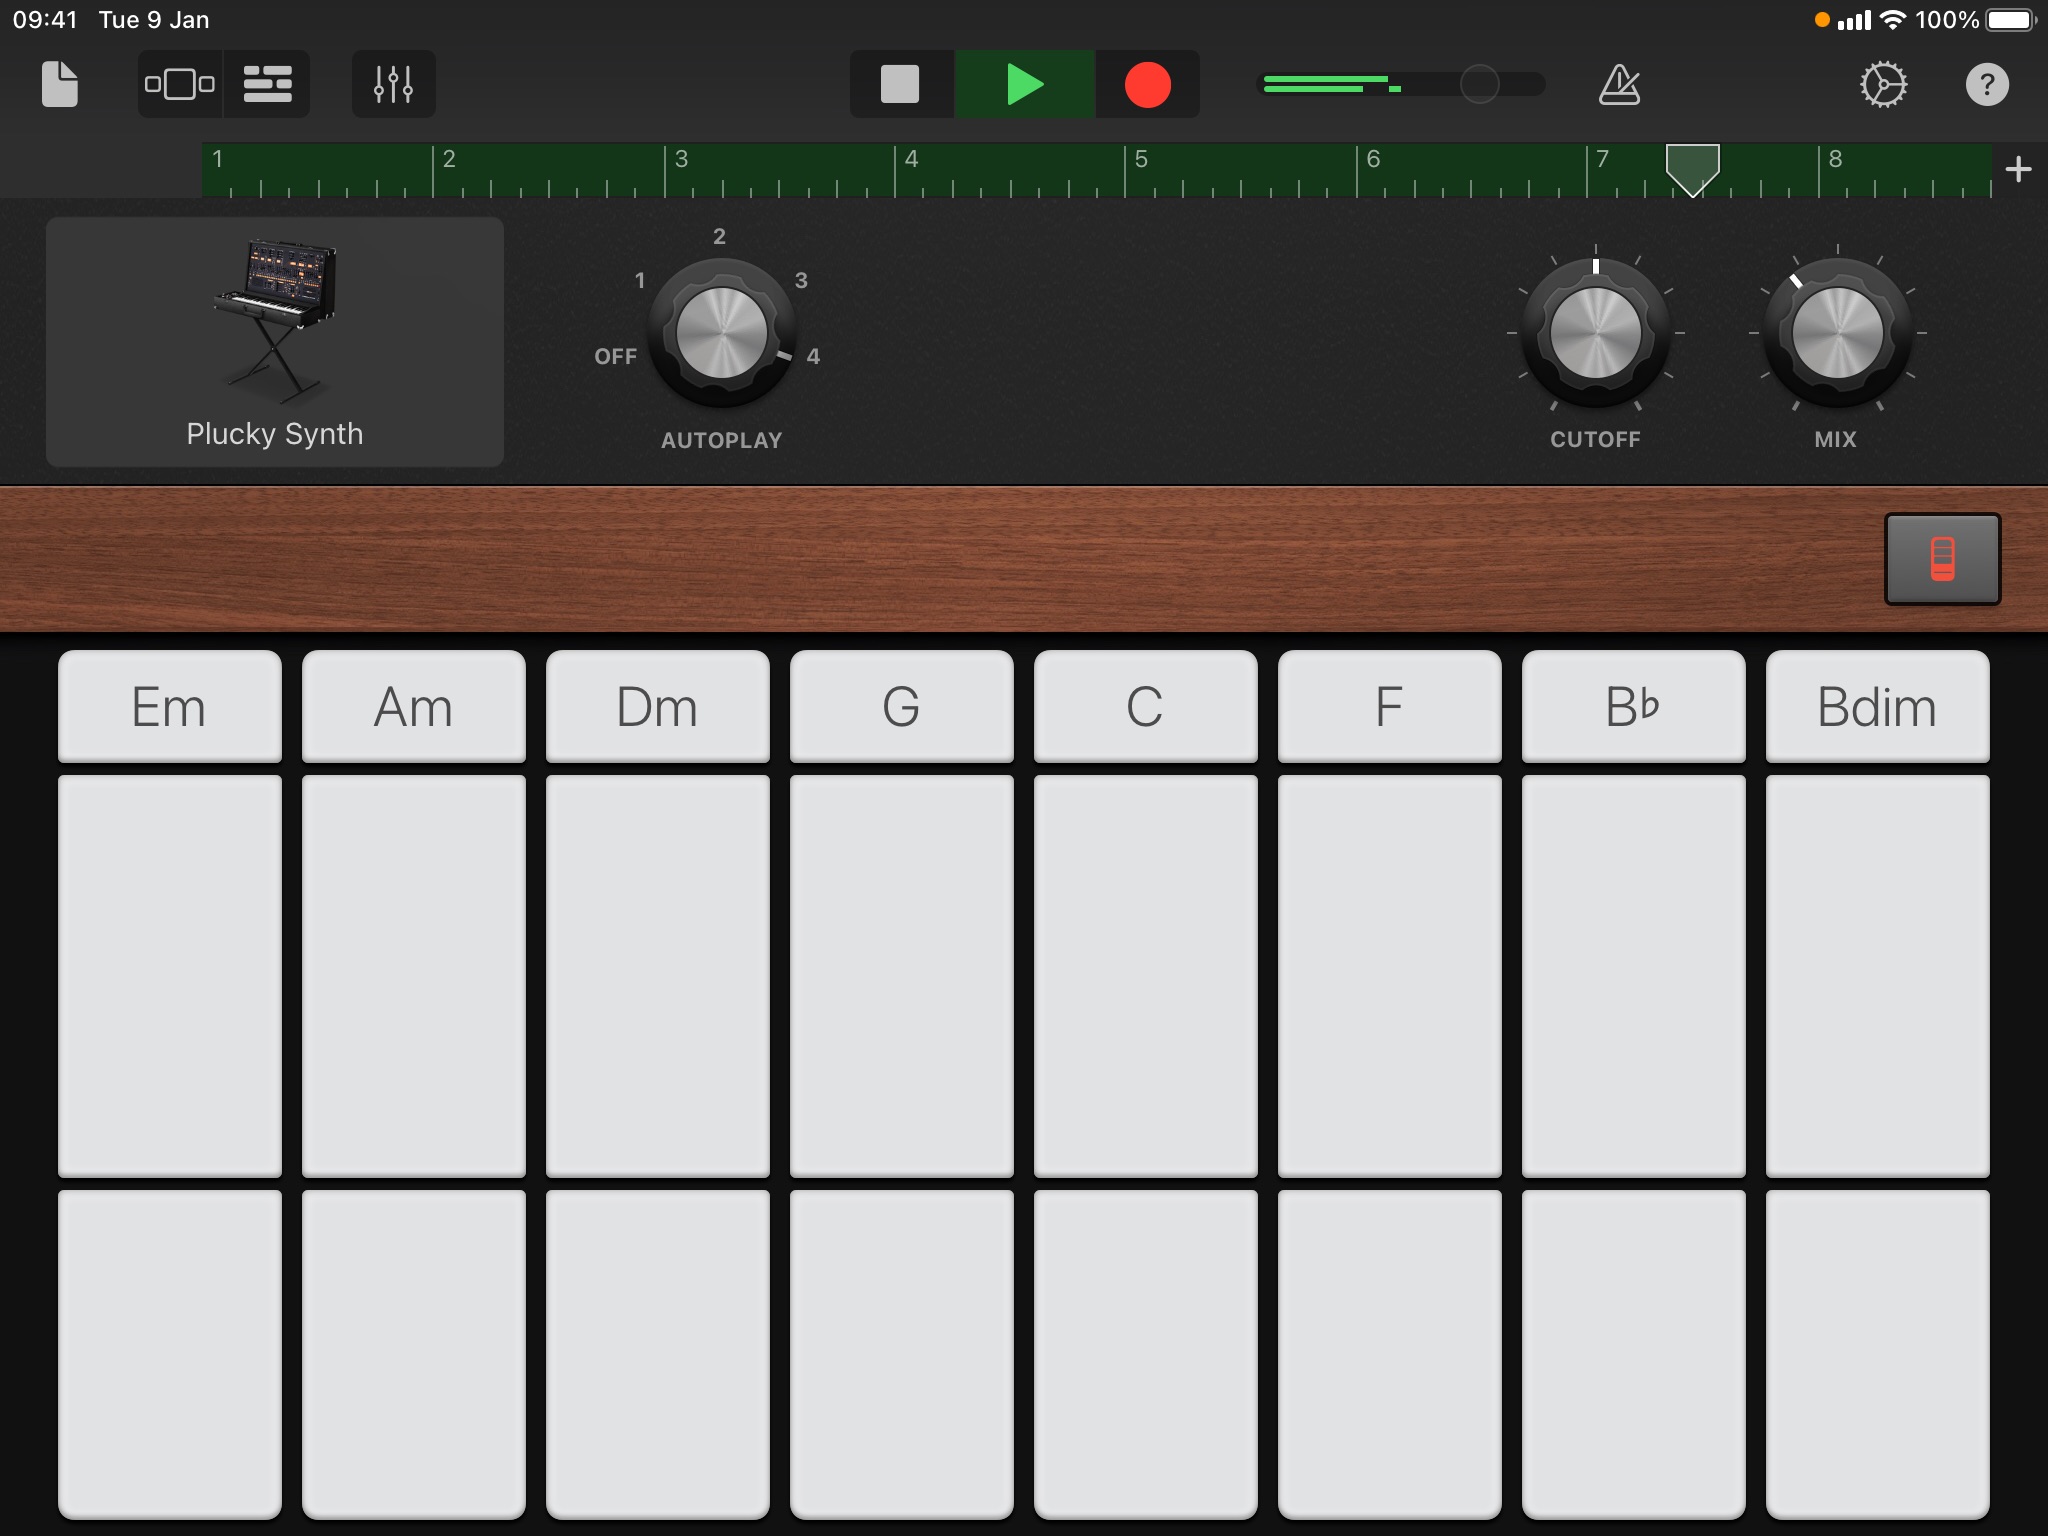 Screenshot of the Smart Keyboard interface in GarageBand for iPad. The track is playing and ‘Plucky Synth’ has been selected.